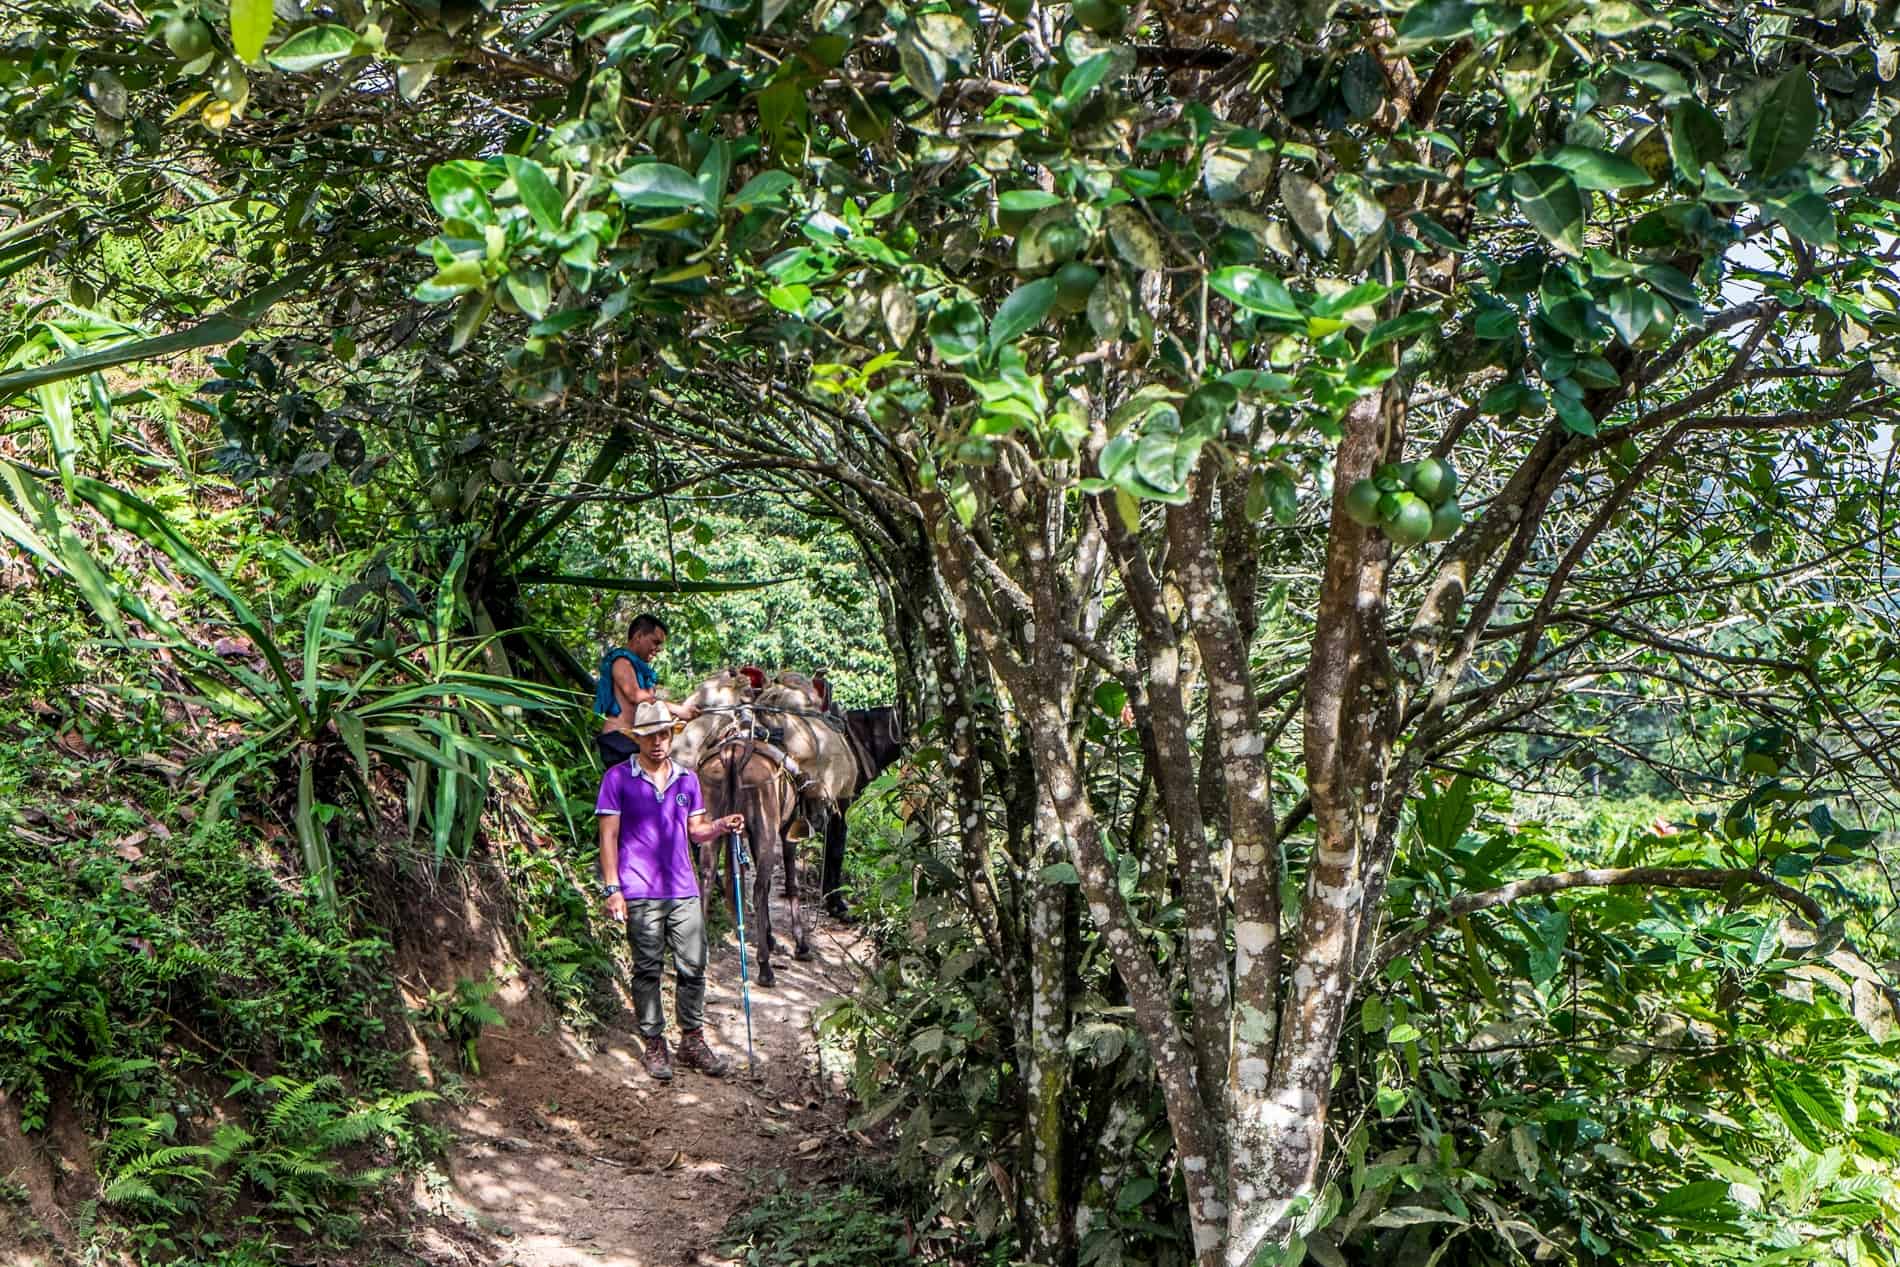 A man on a mule and a hiker on a narrow path, deep jungle trekking back from the Lost City, Colombia.